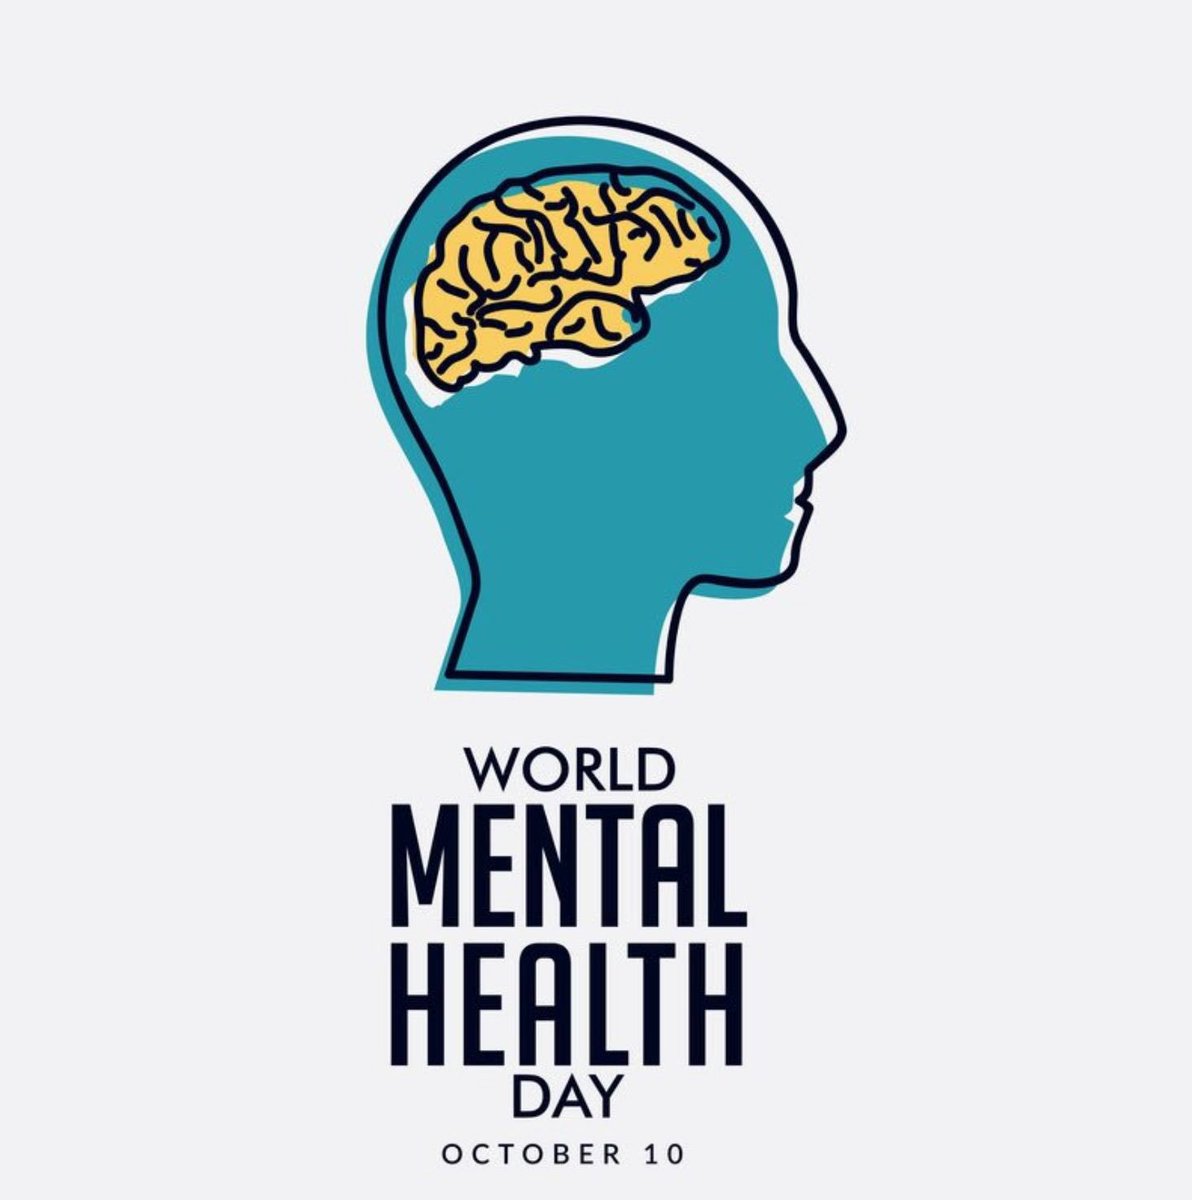 Happy #worldmentalhealthday to those who know all too well the positive therapeutic impact gardening and allotmenteering can have. Much love. 🥦🍆🌽🥑🙏

#worldmentalhealthday2018 

@GWandShows @wmhd2018 @MindCharity @Mencap_Kirklees @mencap_charity @janemerrick23